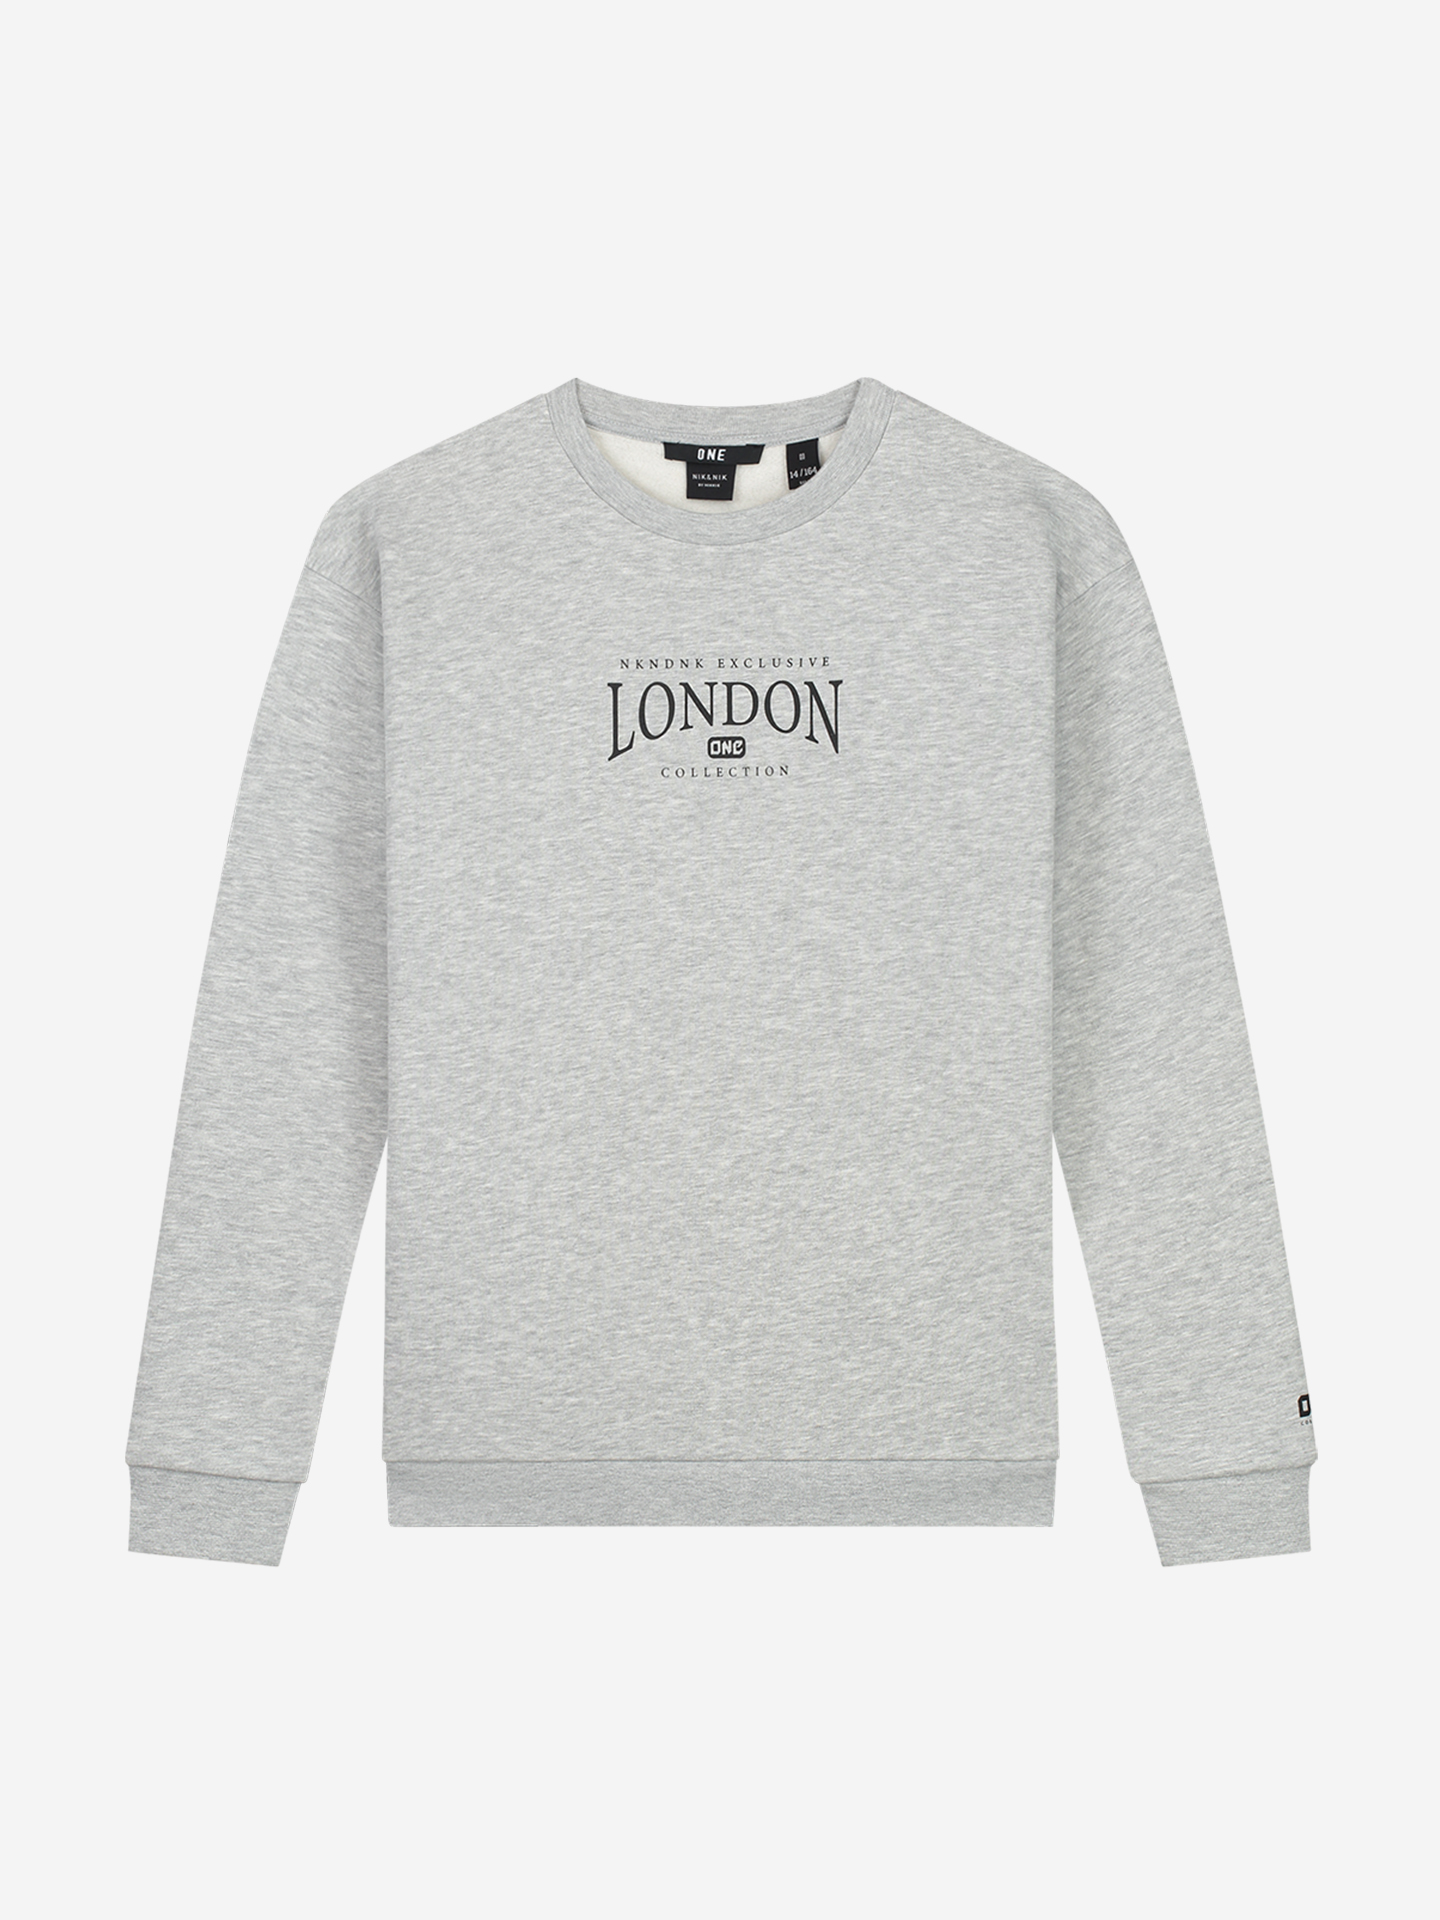 Oversized sweater with London print